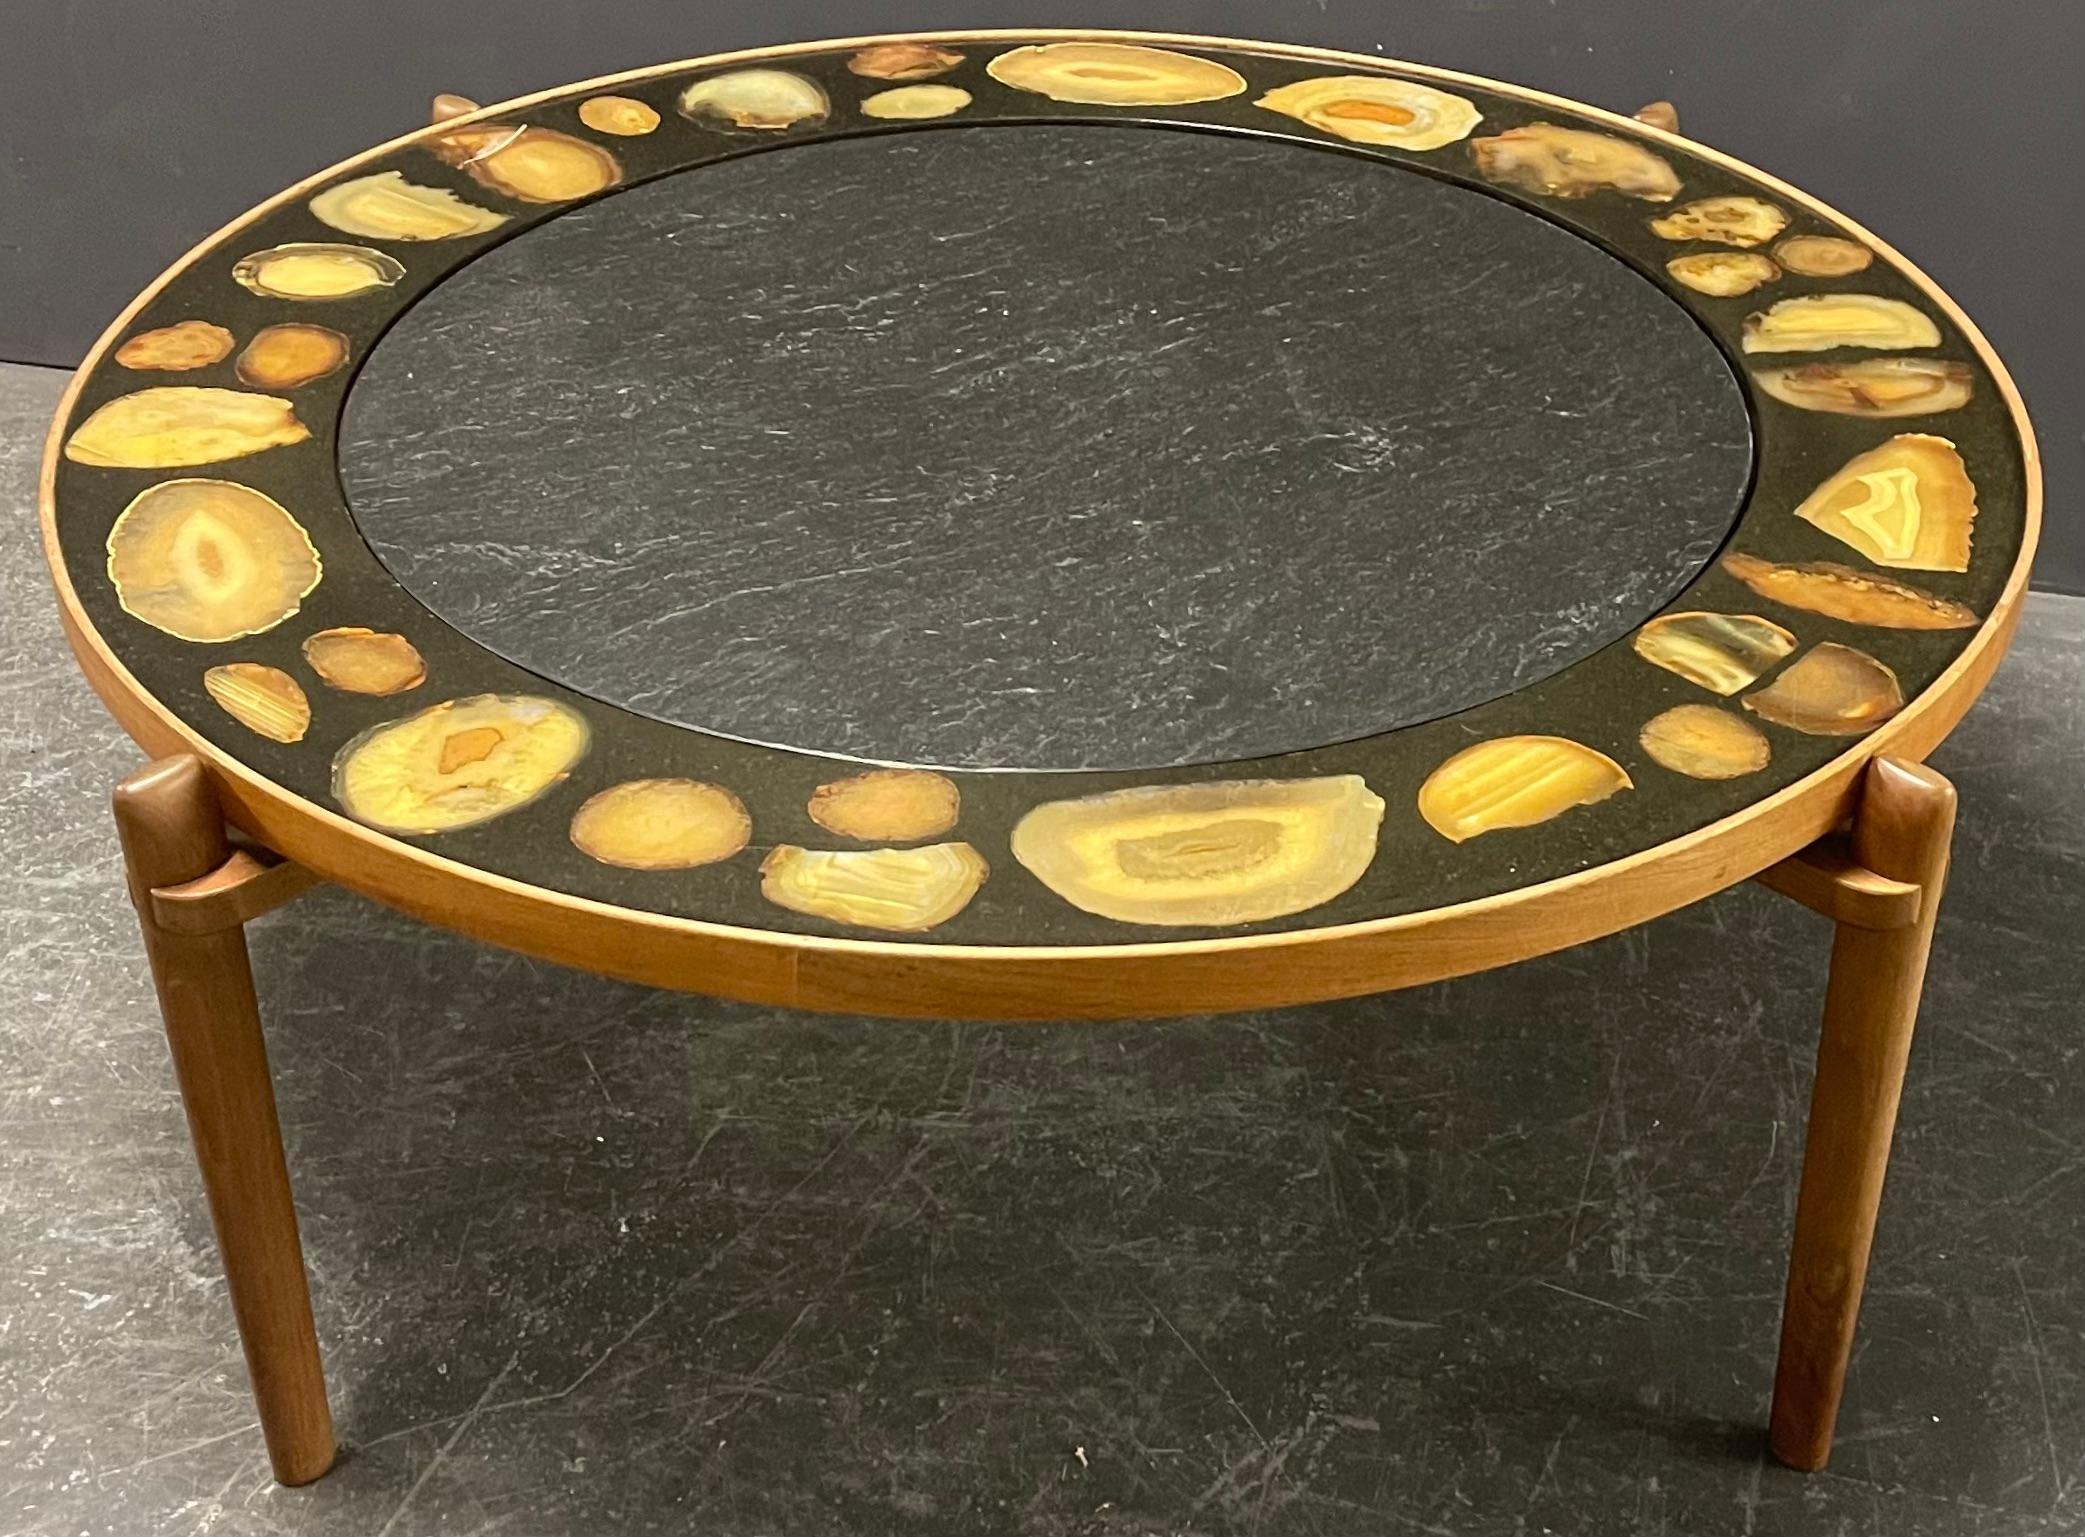 Very elegant massive teakwood base with a slate top surrounded by a belt of large agate inlays. made by the famous glass artist Heinz Lilienthal, who worked for Aristoteles Onassis und Stavros Niarchos.